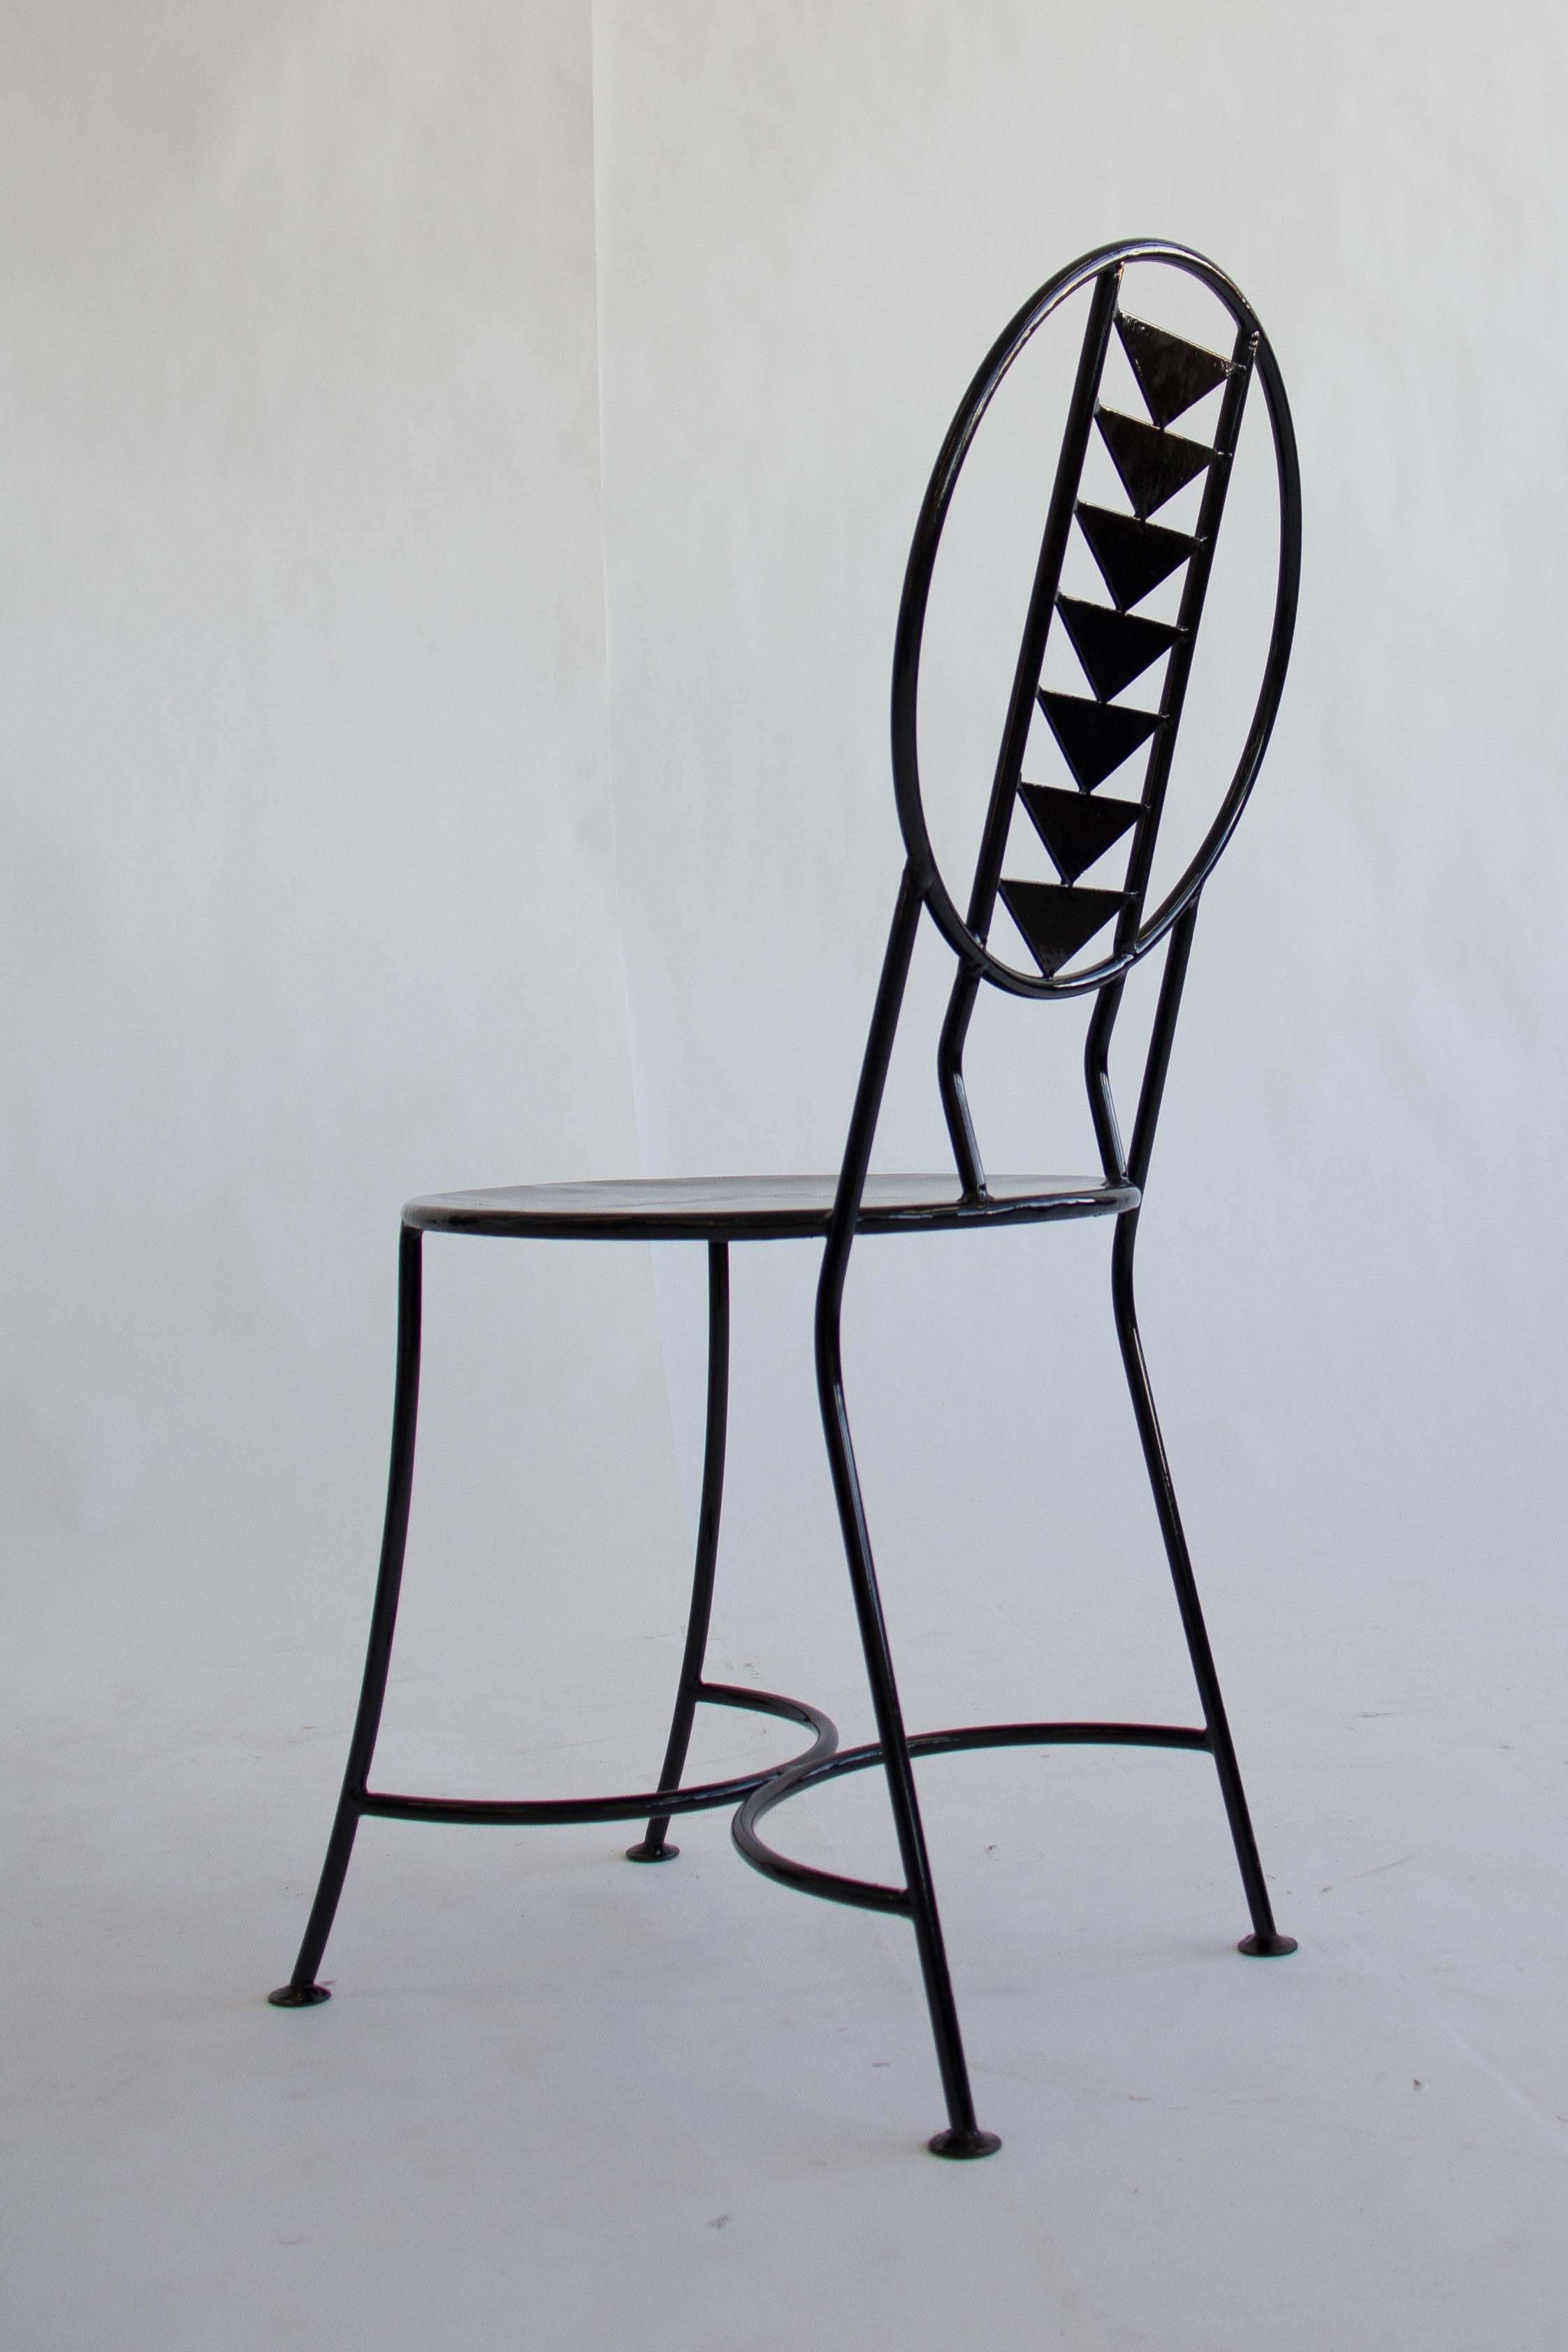 American Set of Wrought Iron Chairs in the Style of Frank Lloyd Wright's Midway Chair